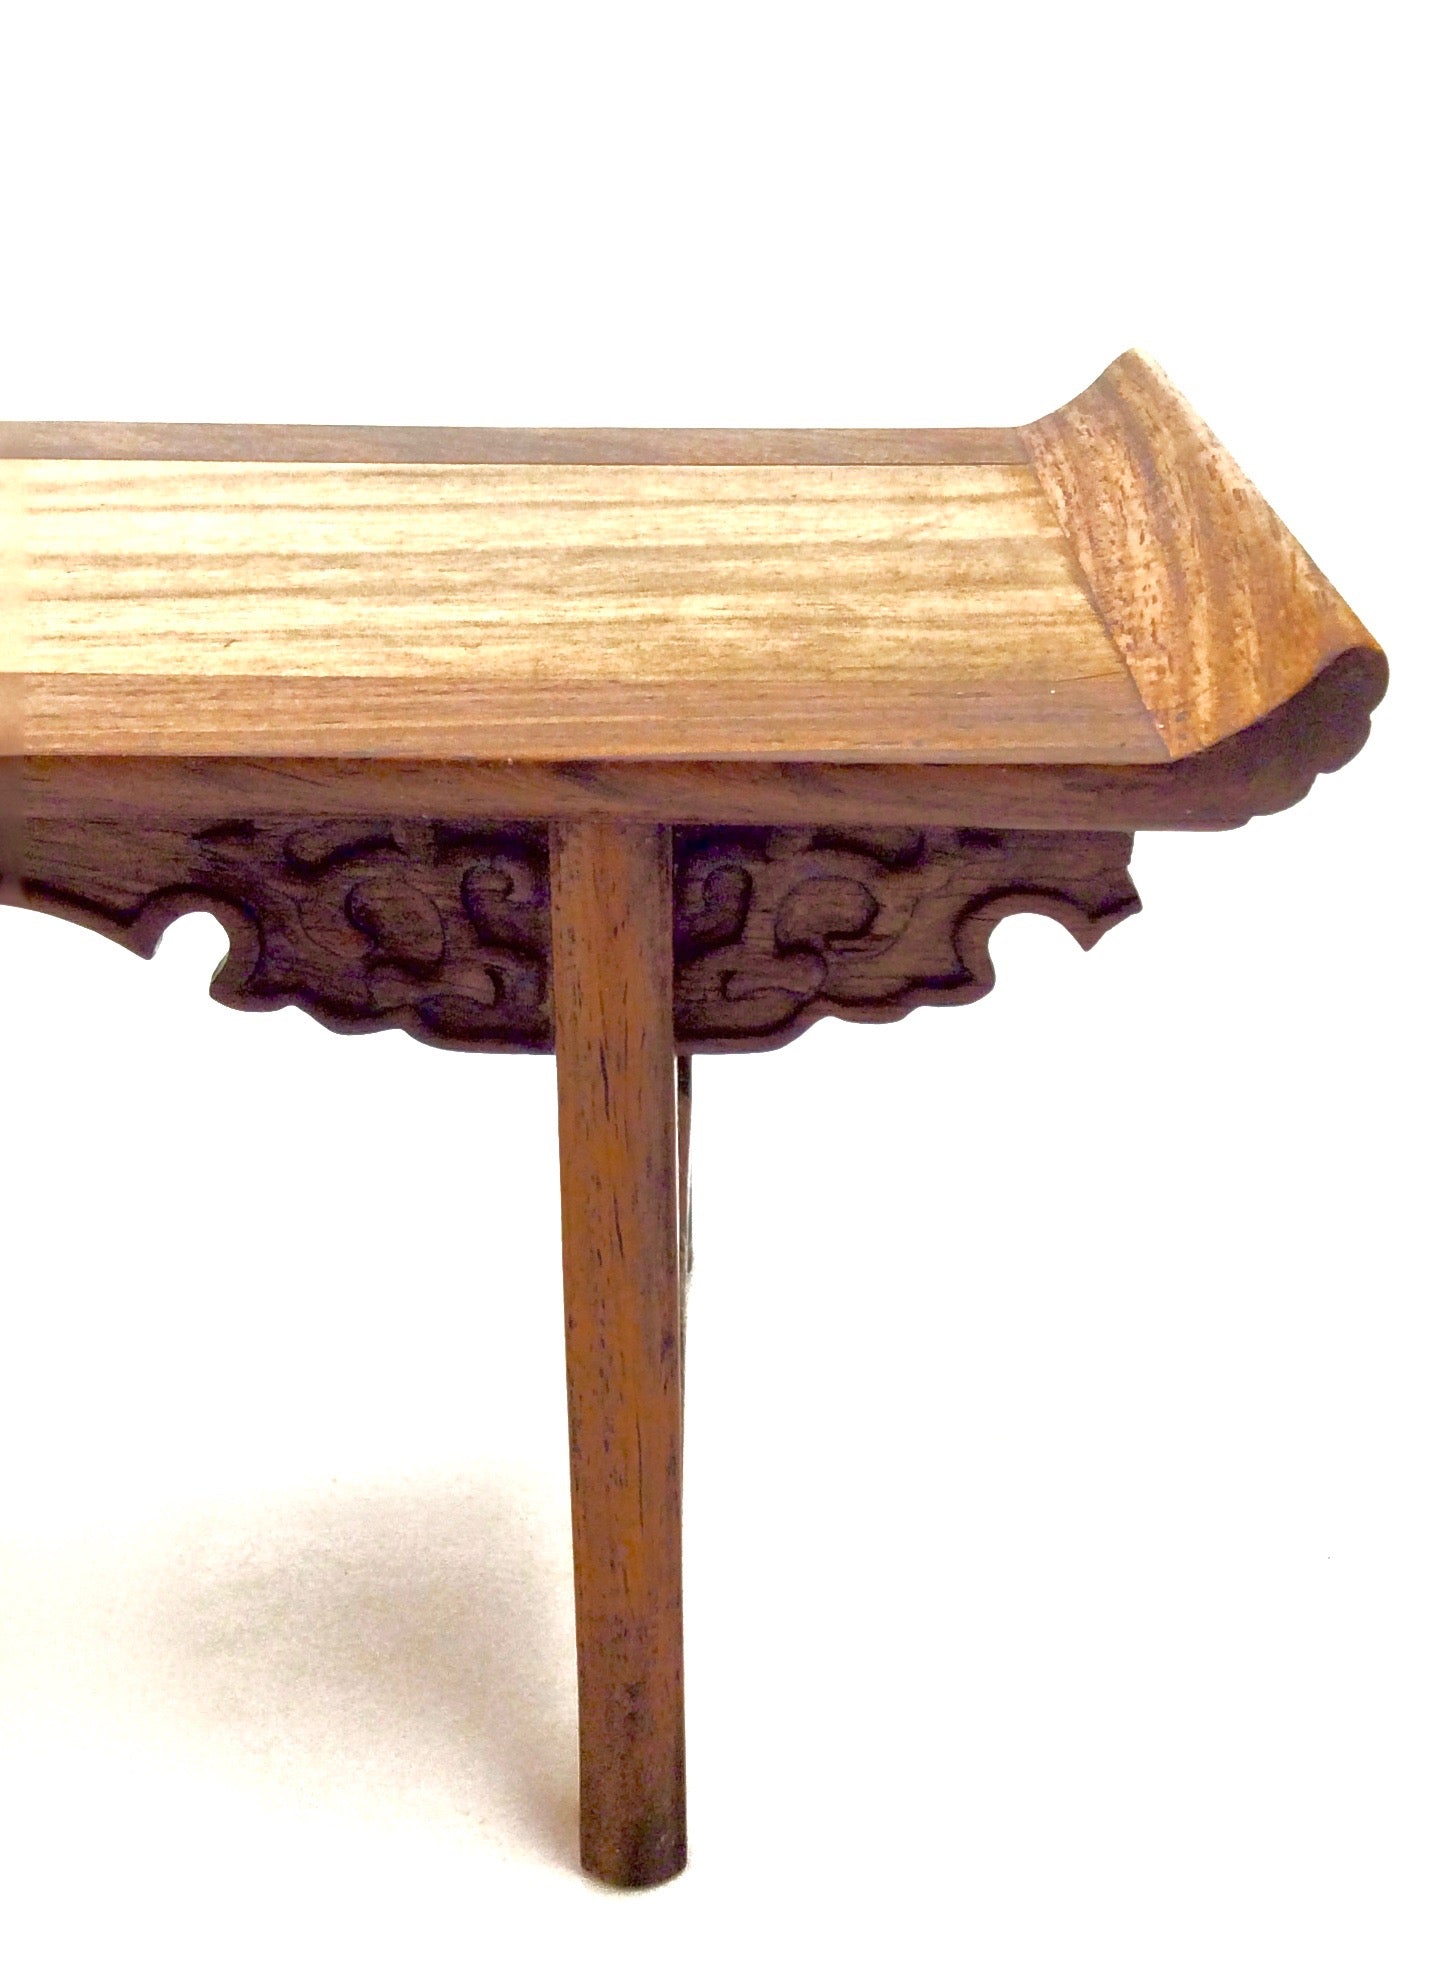 Vintage Chinese Trestle Leg Table Top Display Stand with Everted Flanges | Huanghuali Wood